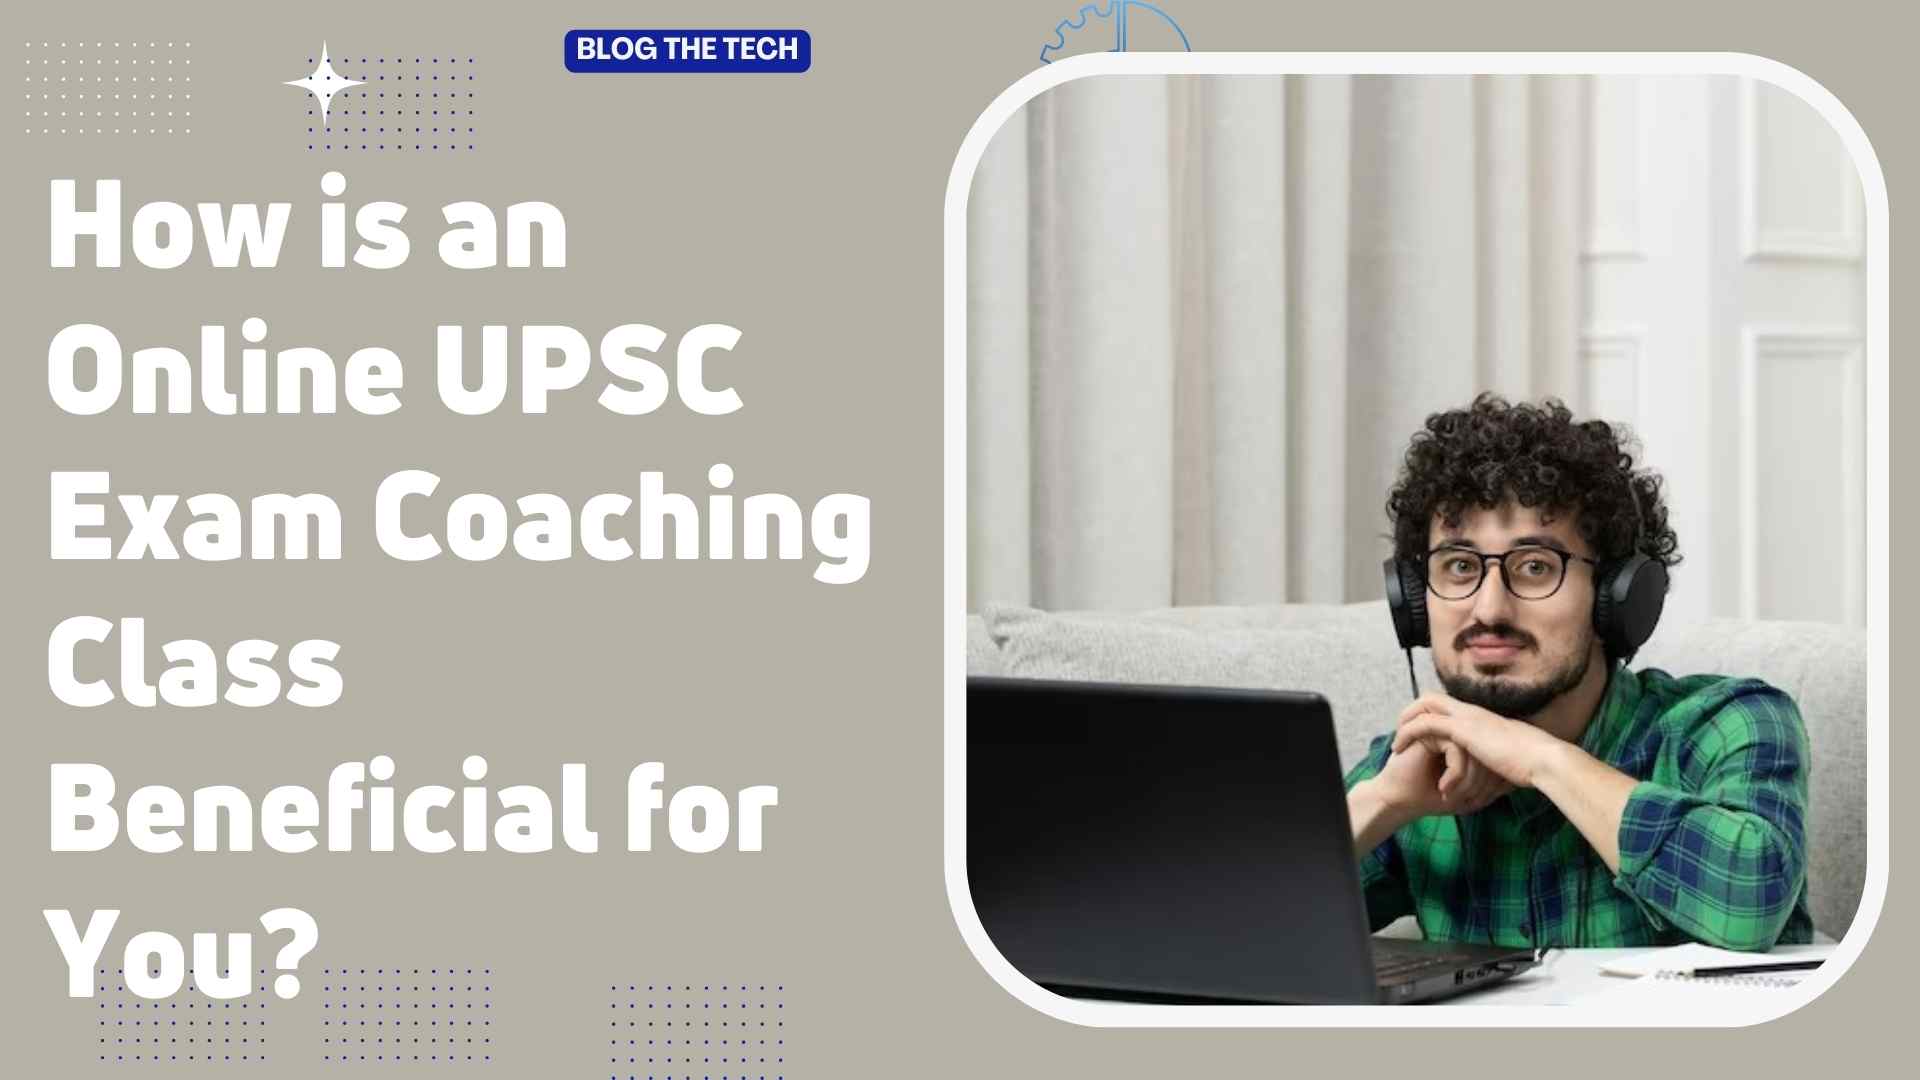 How is an Online UPSC Exam Coaching Class Beneficial for You